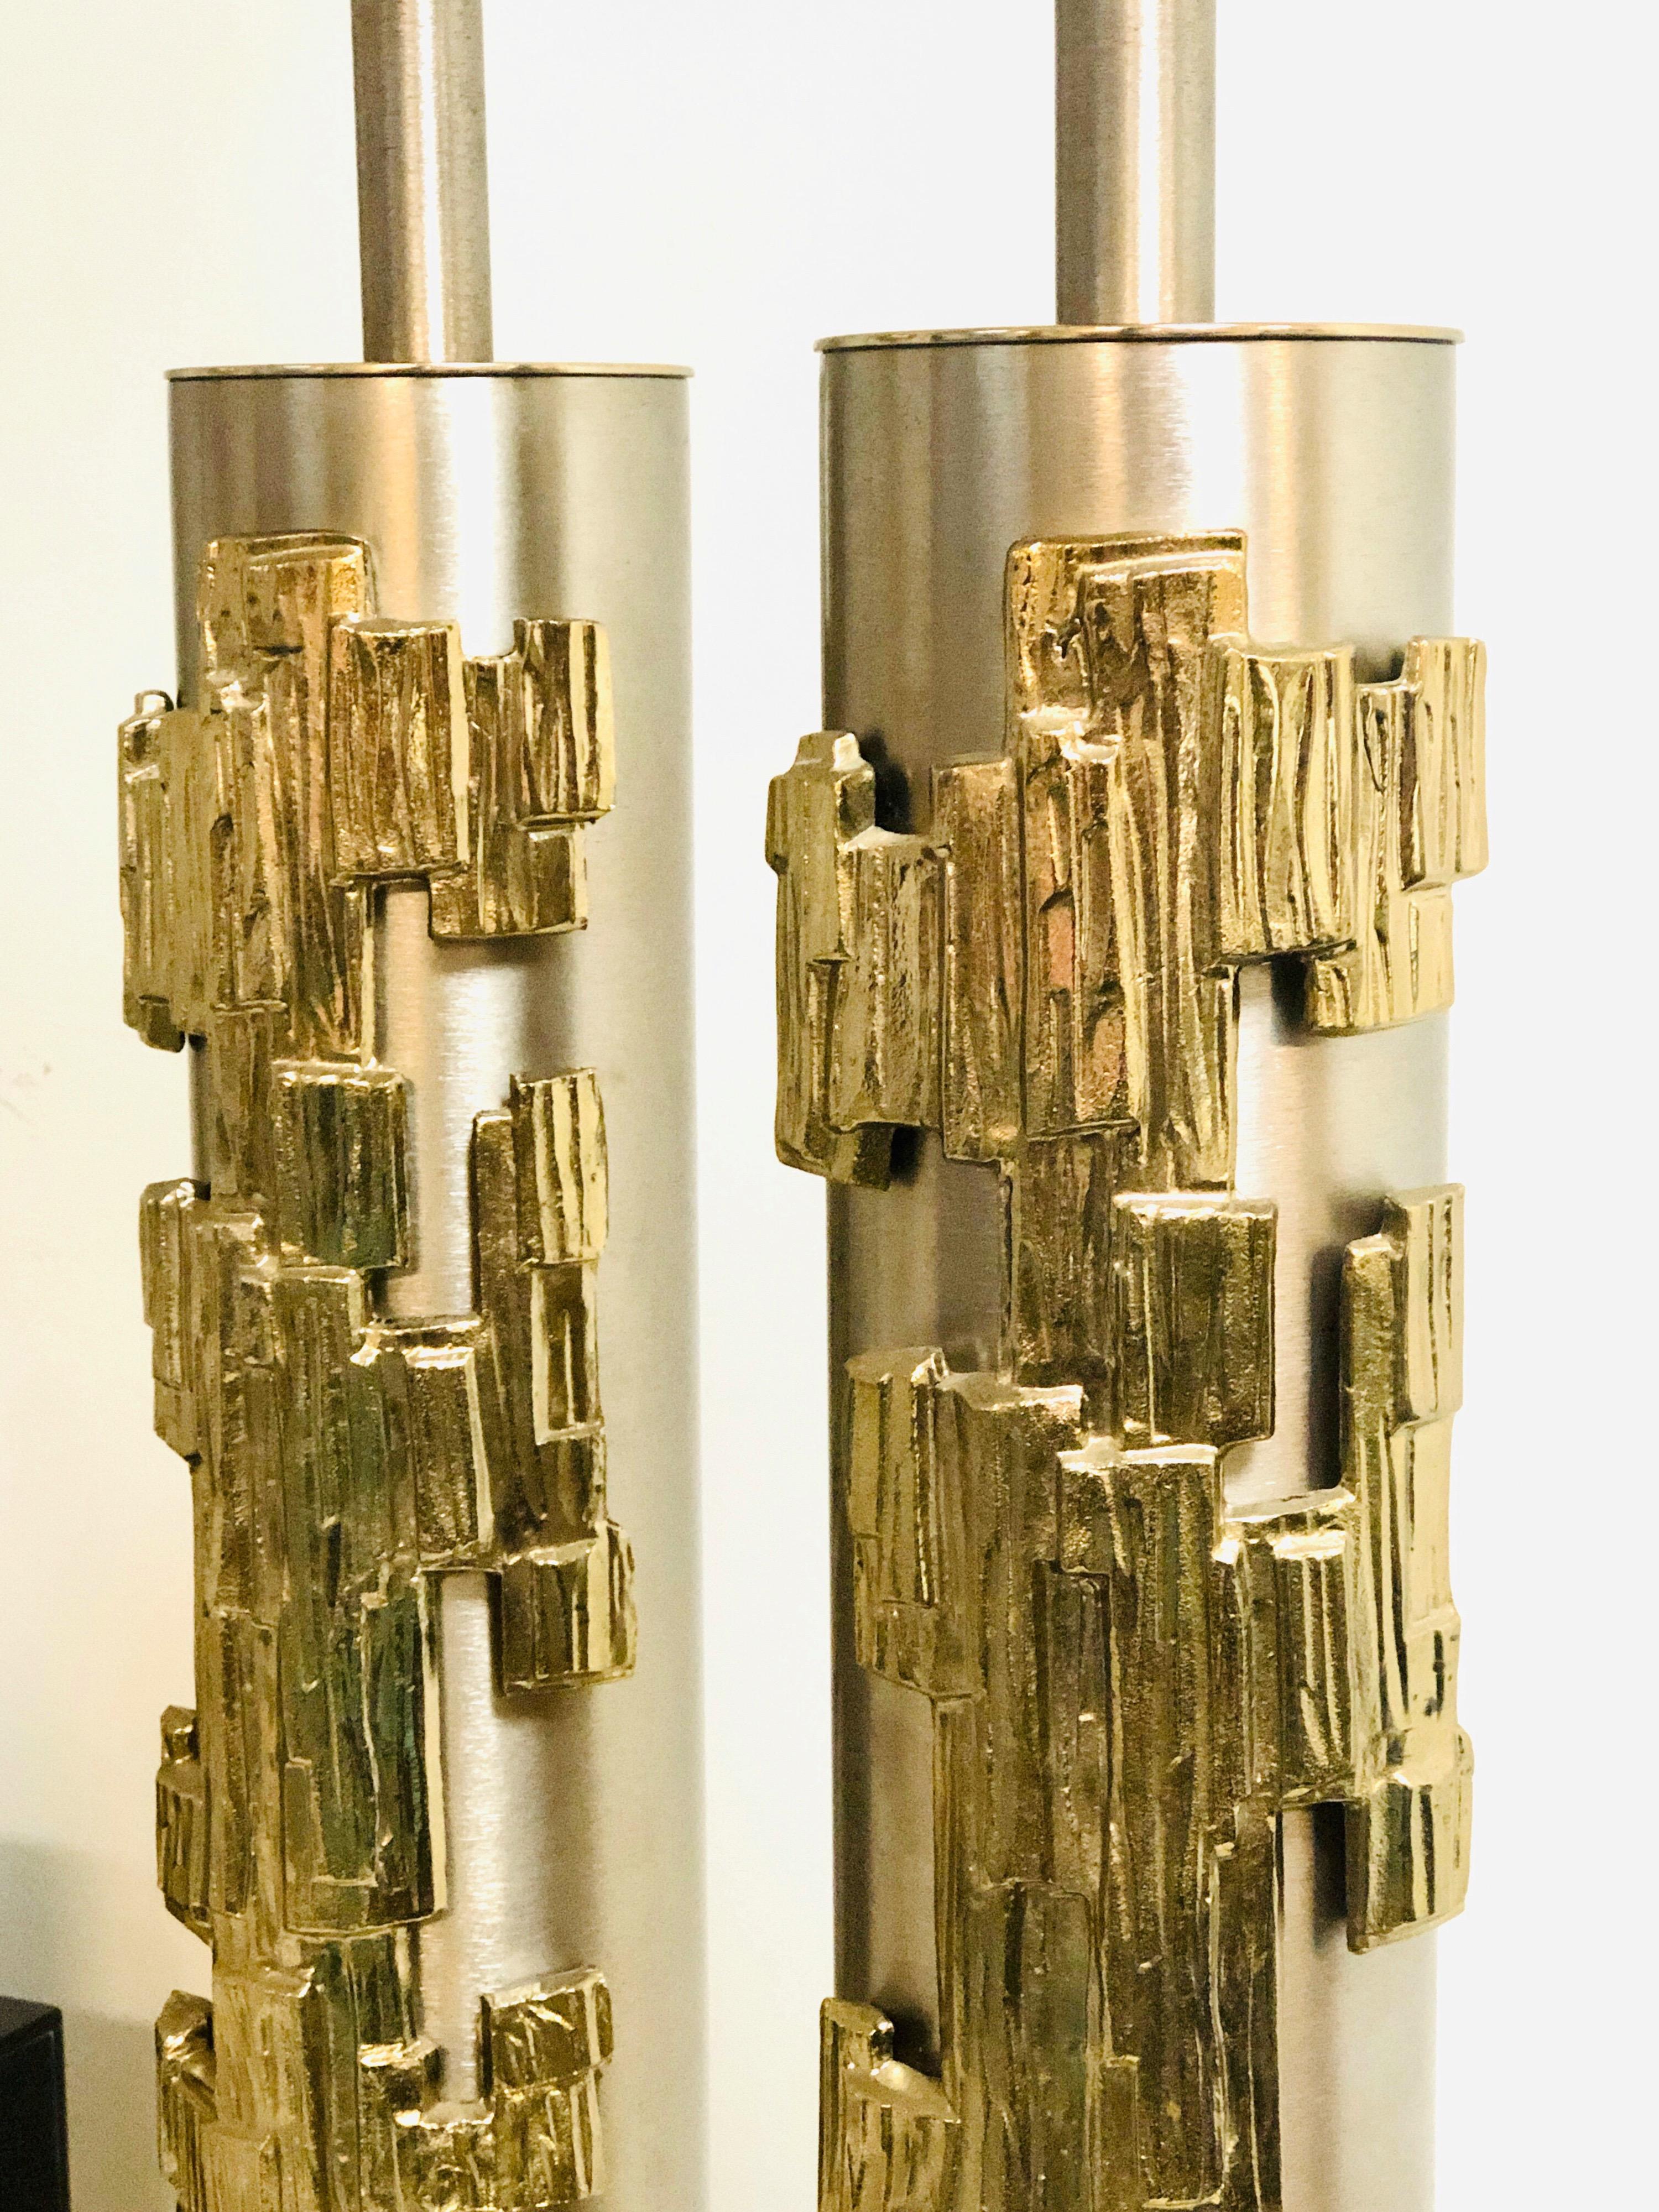 Mid-20th Century Pair of Sculptural Table Lamps Brushed Nickel and Brass by Laurel